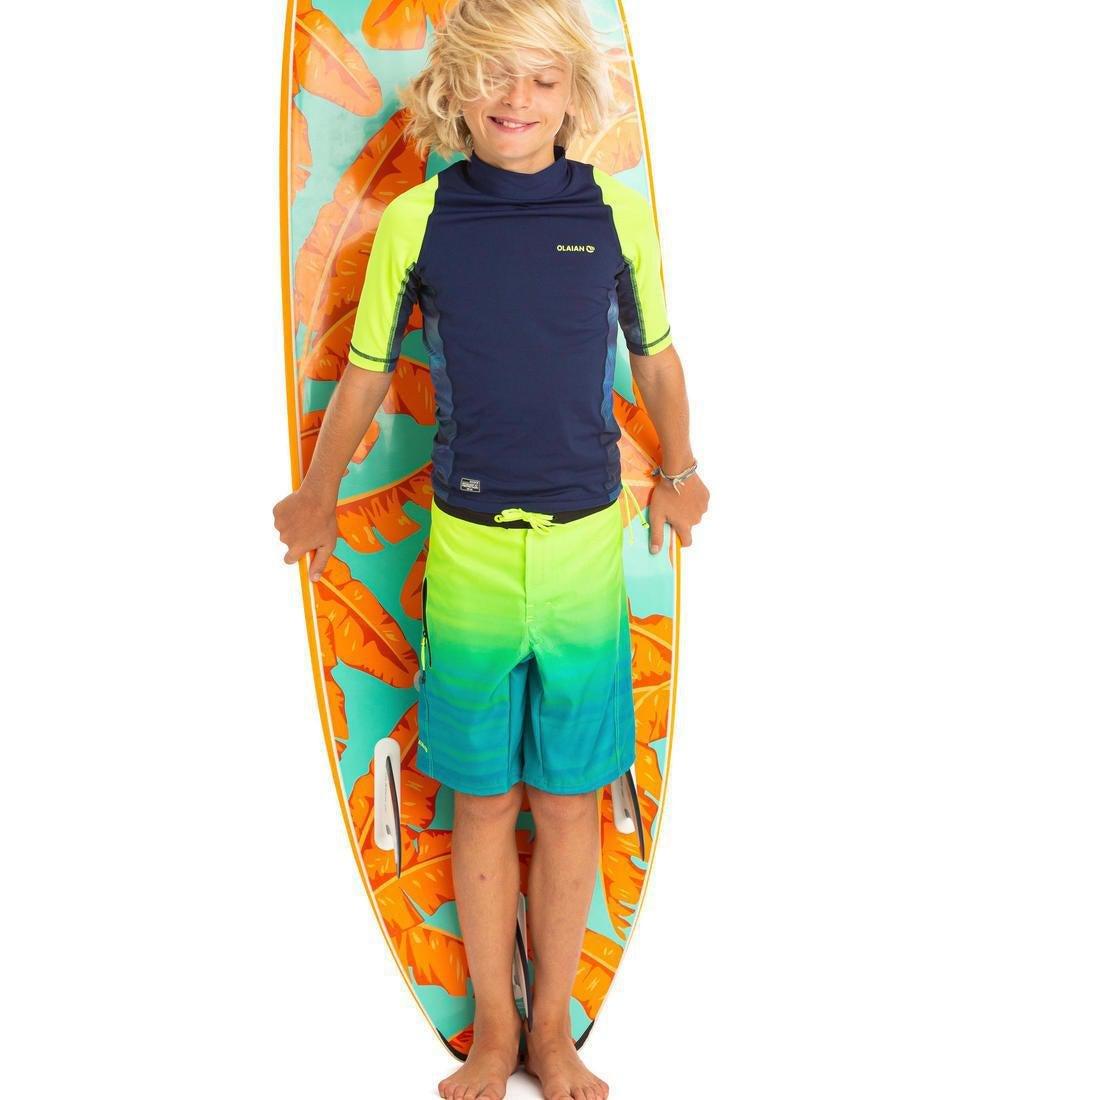 OLAIAN - 500Kids Short Sleeve Uv Protection Surfing Top T-Shirt Print, Fluo Lime Yellow